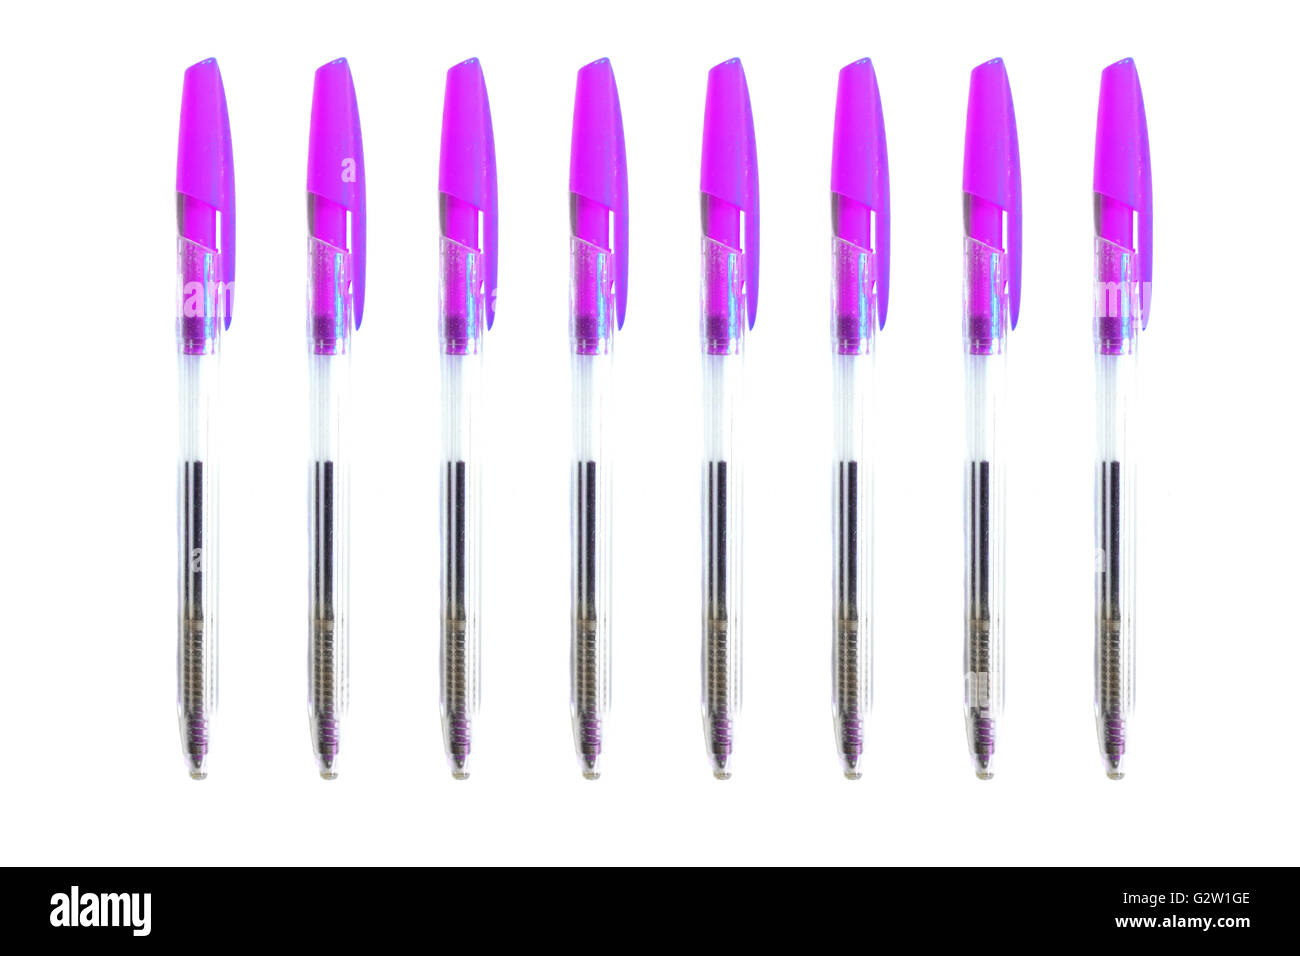 Purple biro pens photographed against a white background. Stock Photo